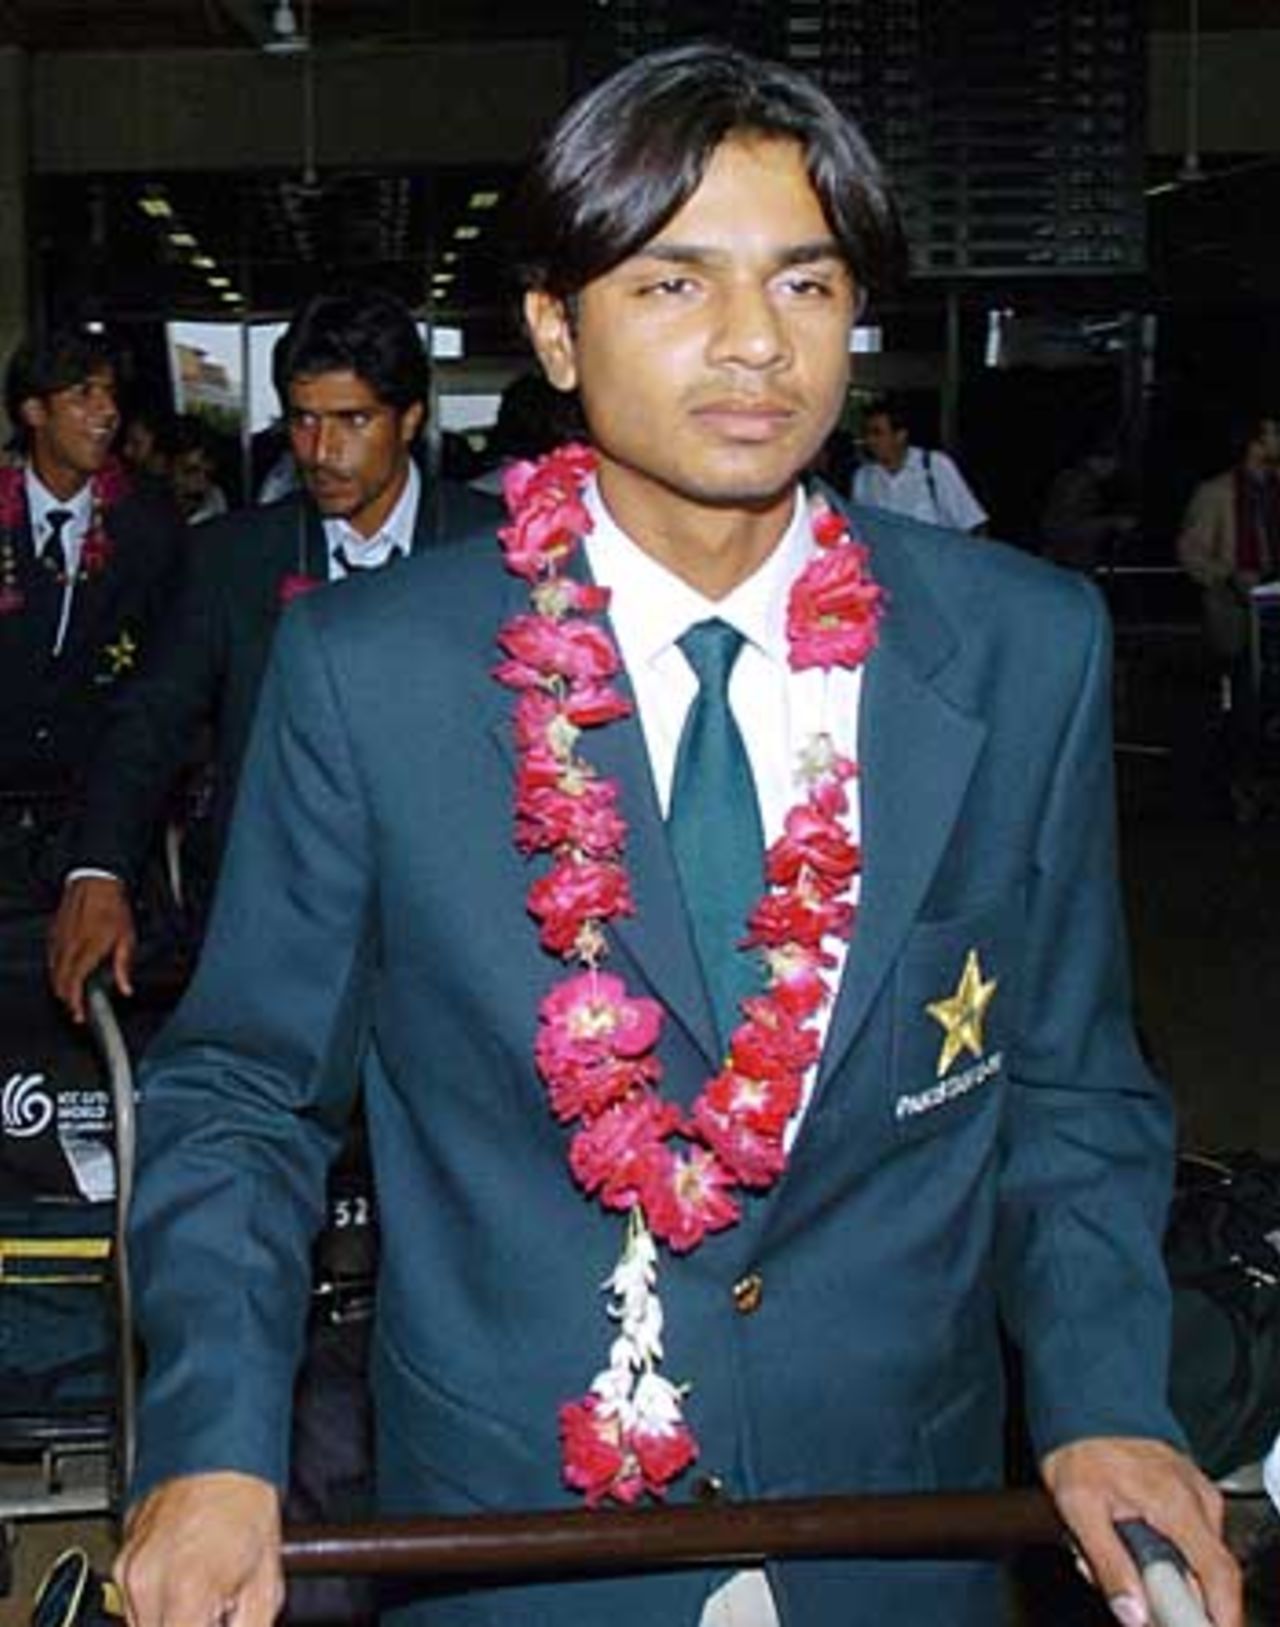 Laiq Muhammad returns home after being in the Pakistan Under-19 squad which won the the World Cup, Karachi, February 21, 2006